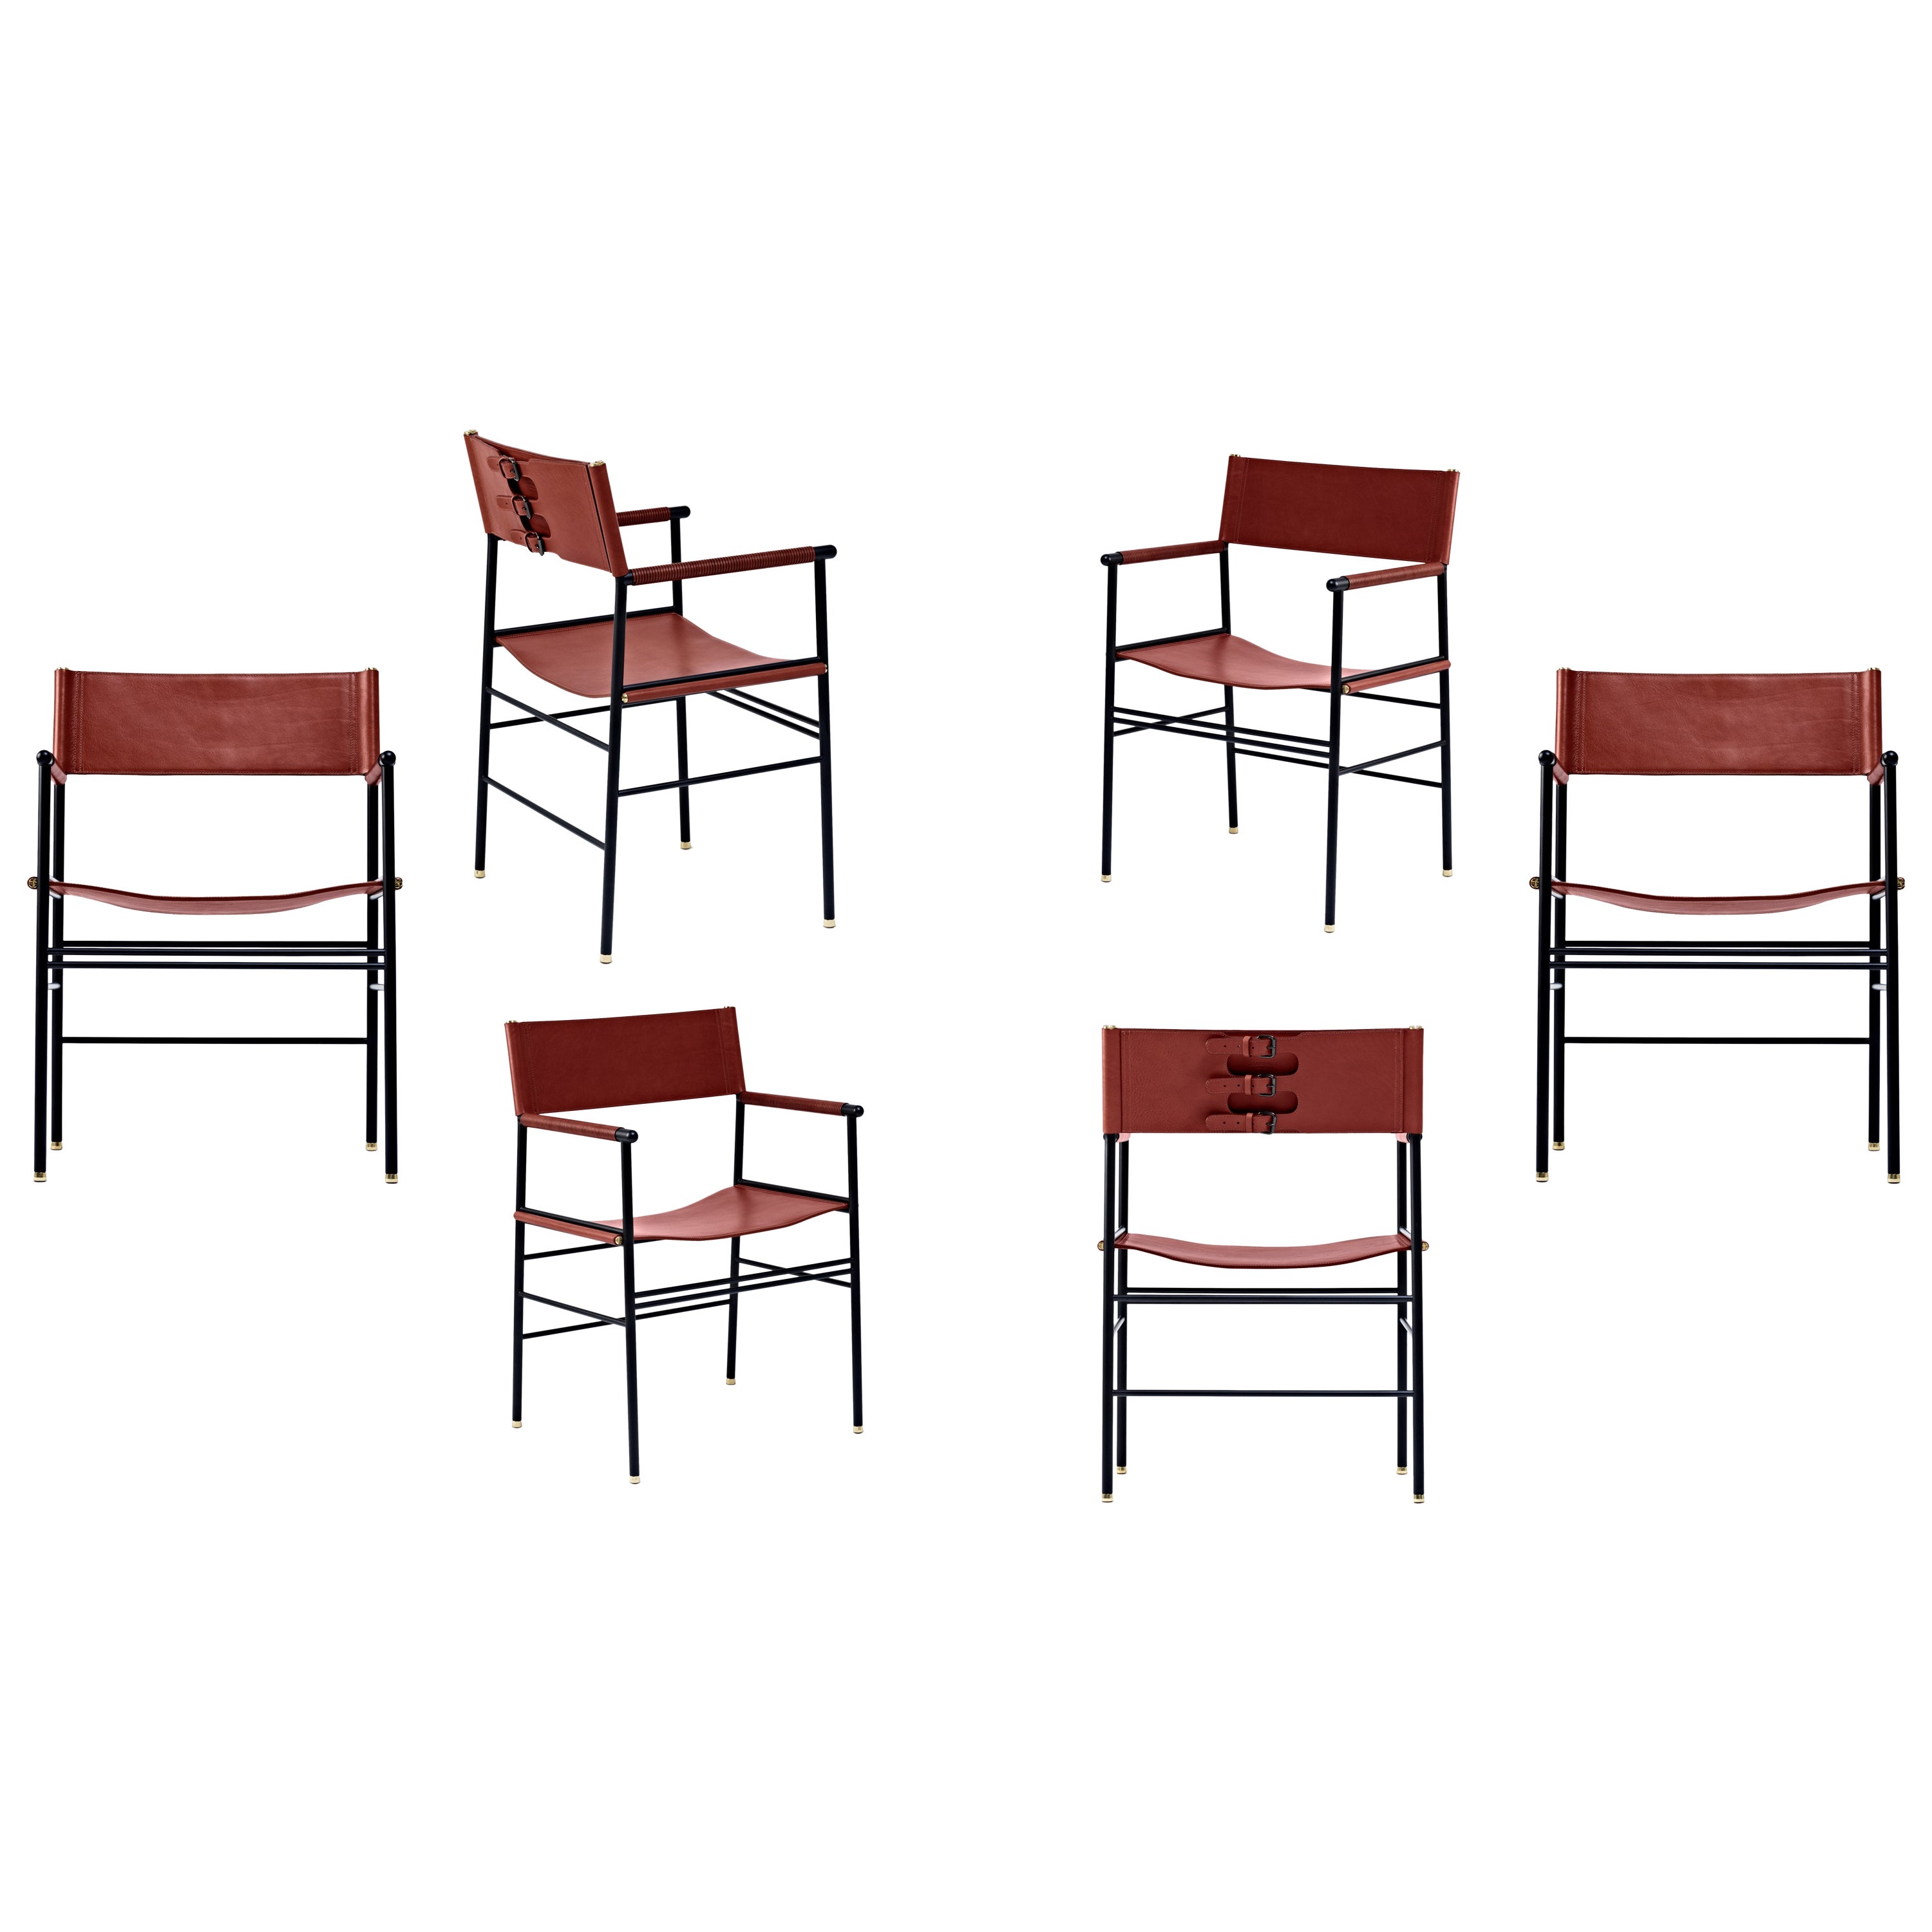 Set of 6 Timeless Classic Contemporary Chair Cognac Leather & Black Rubber Metal